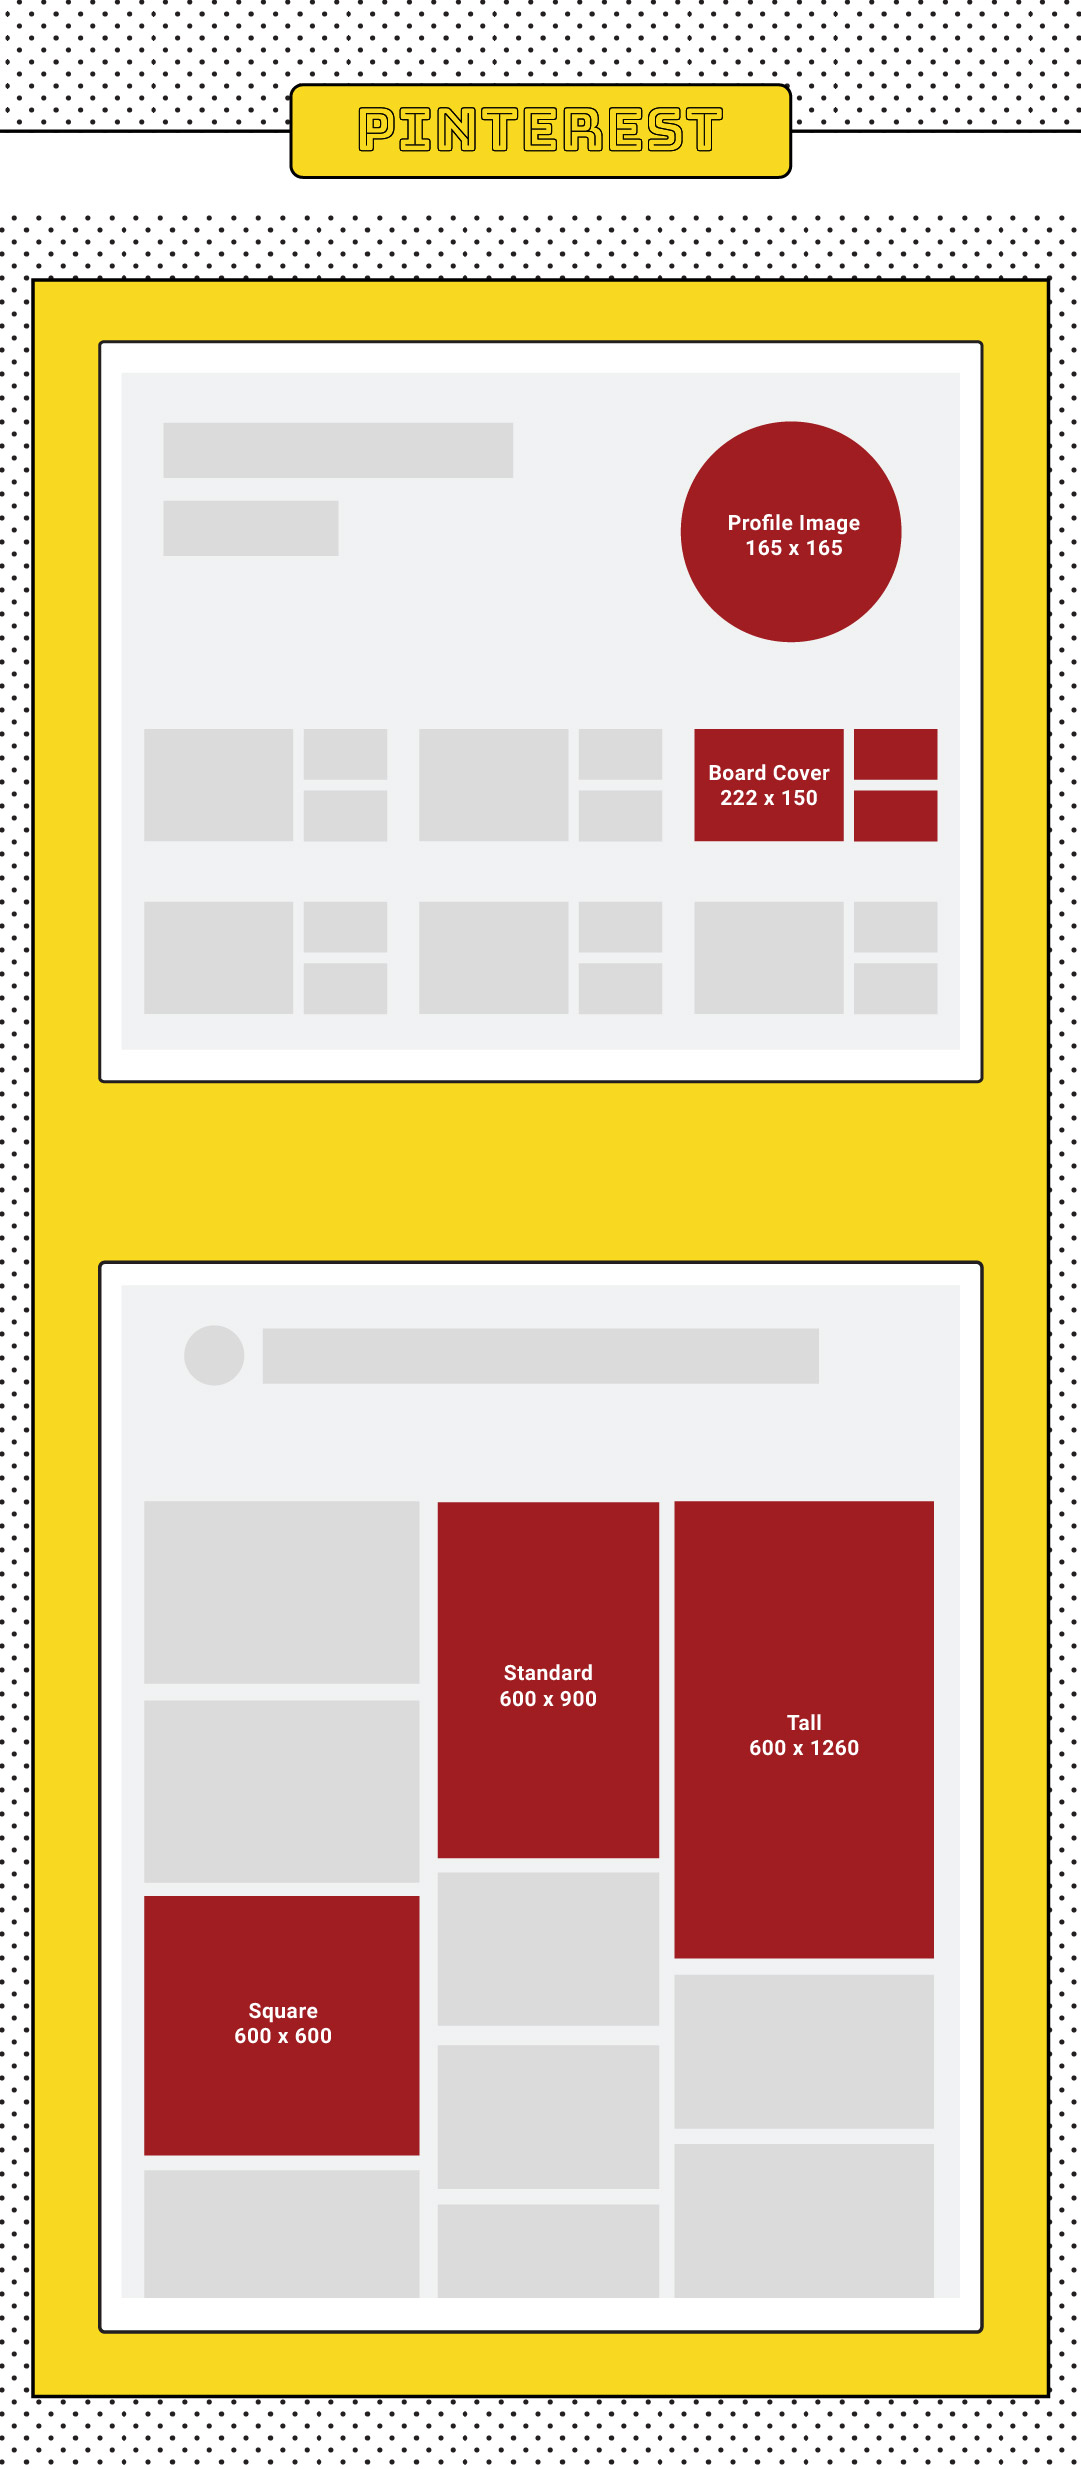 Pinterest image size guide